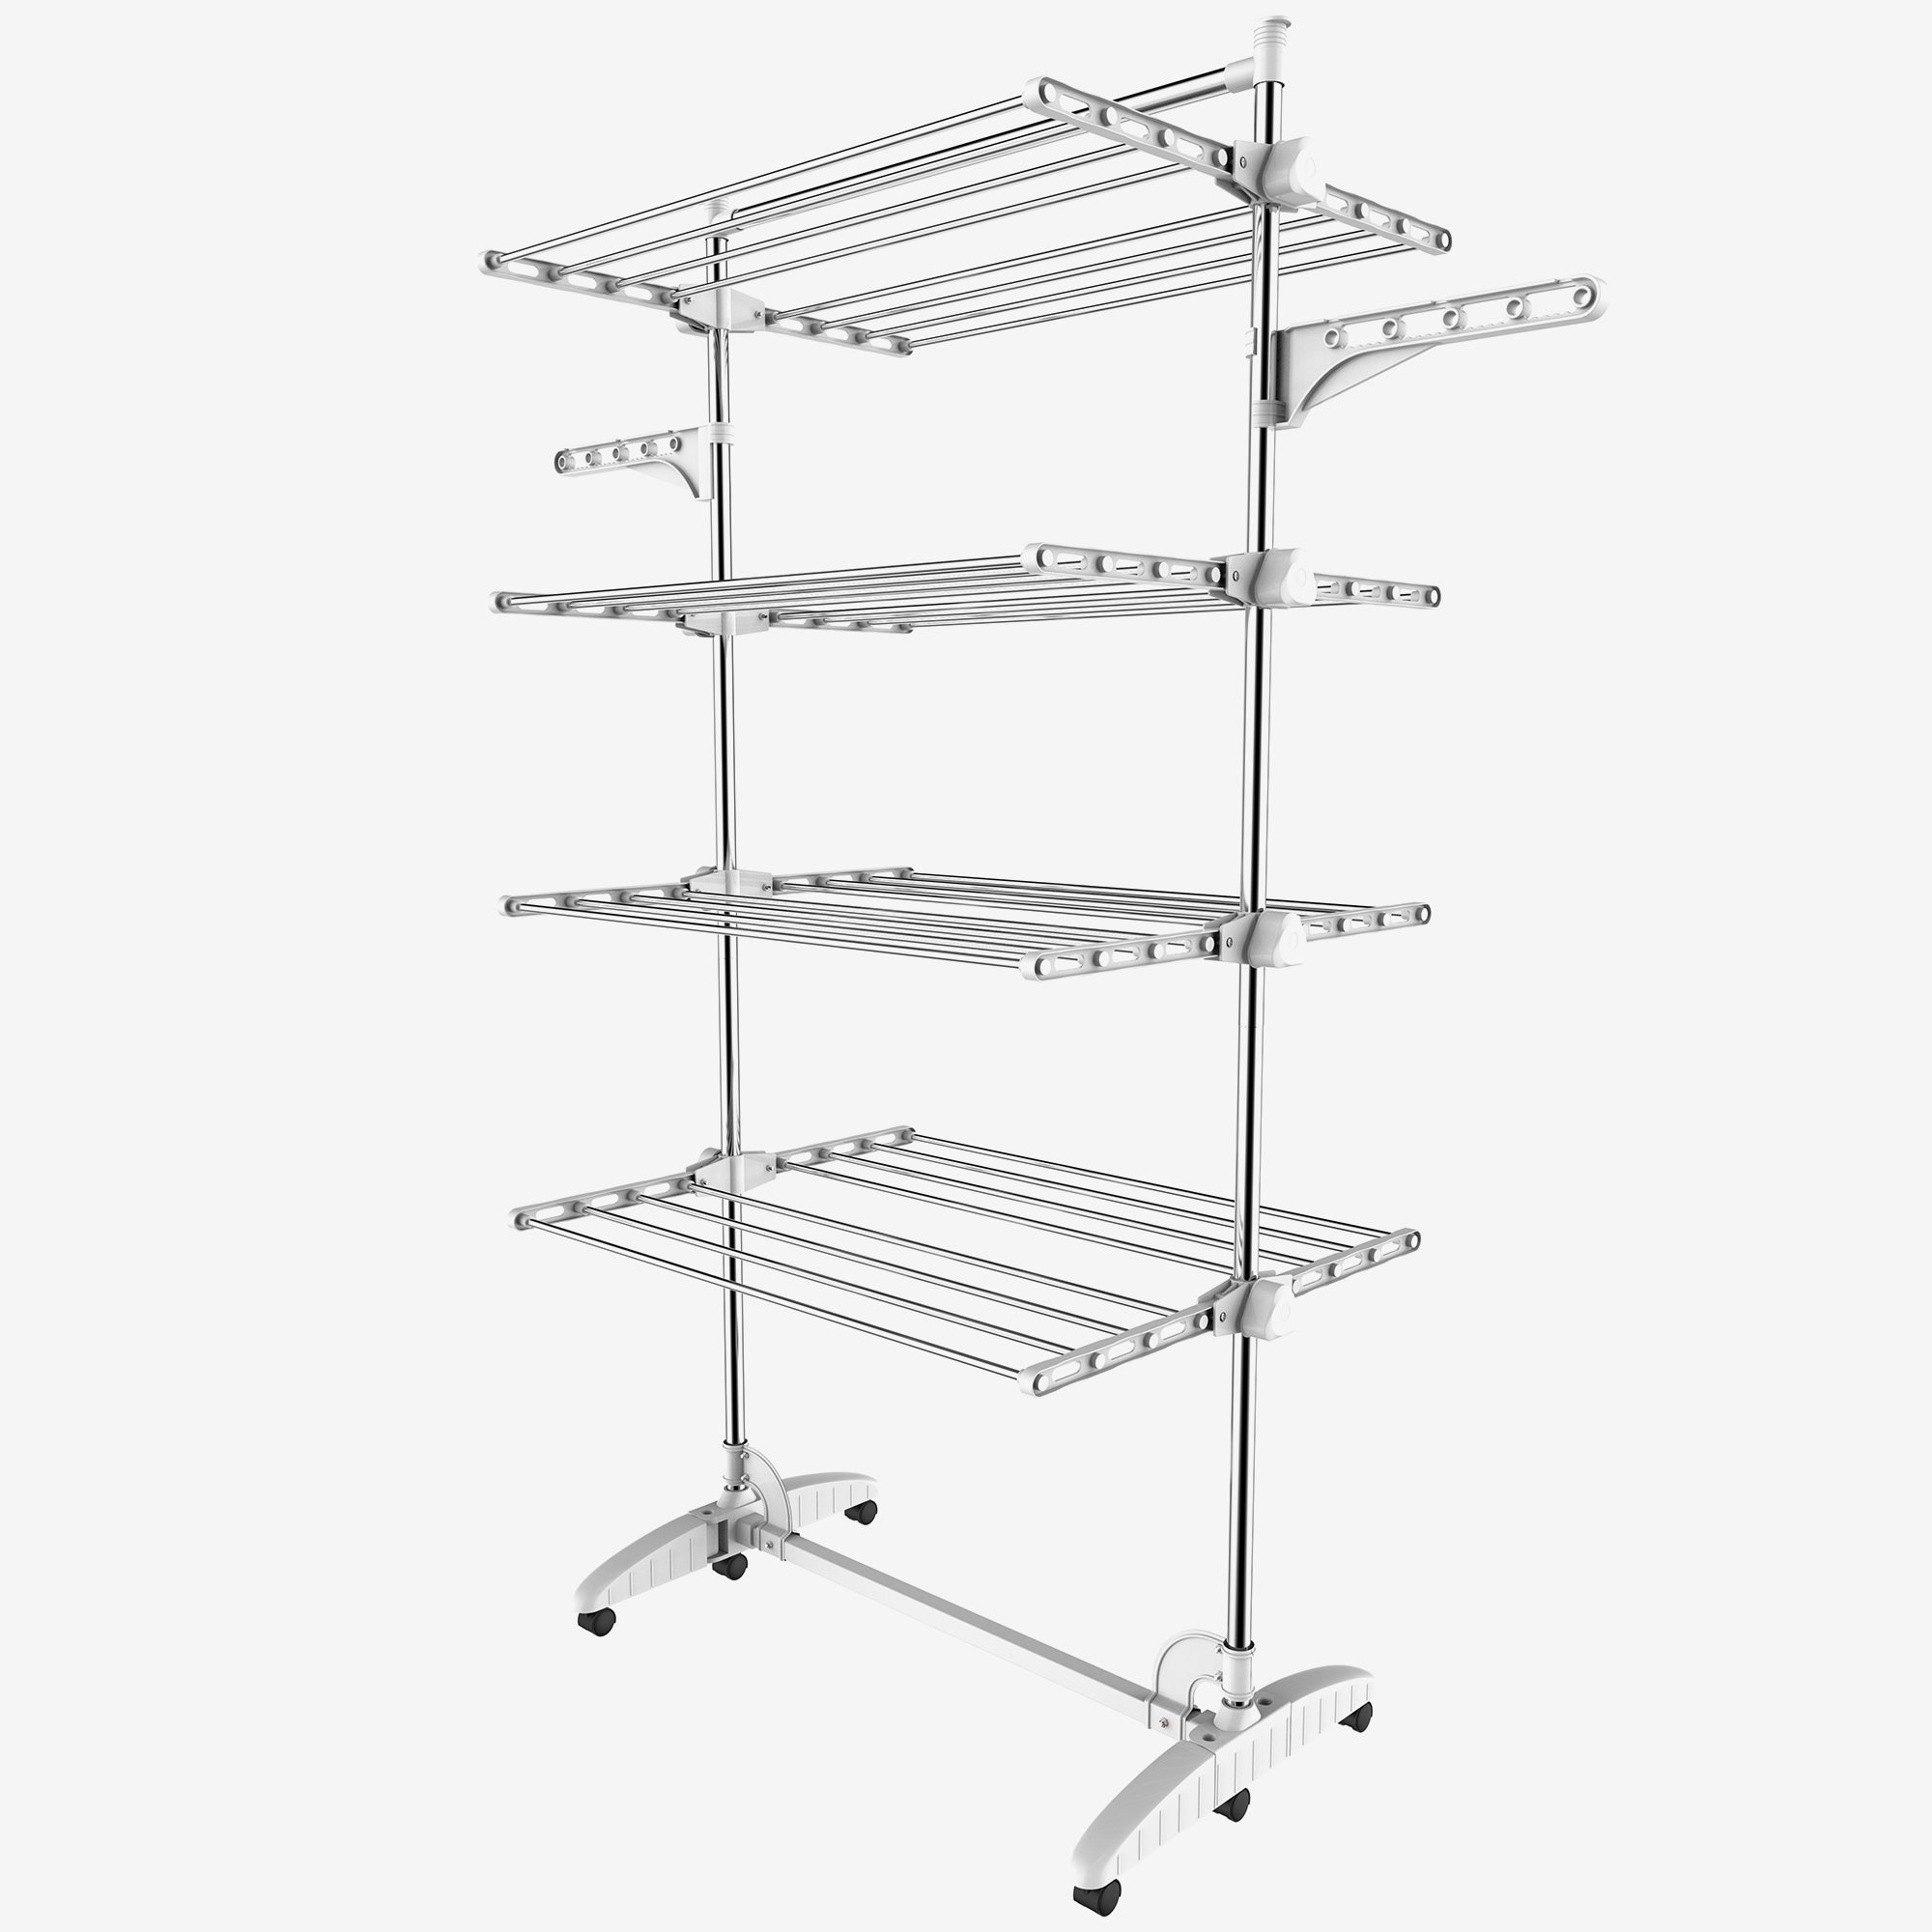 Laundry-Drying-Rack-4-shelves-with-top-bar-White-Laundry-Drying-Rack-4-shelves-White-with-wings-and-top-bar-Material-Stainless-steel-tubes